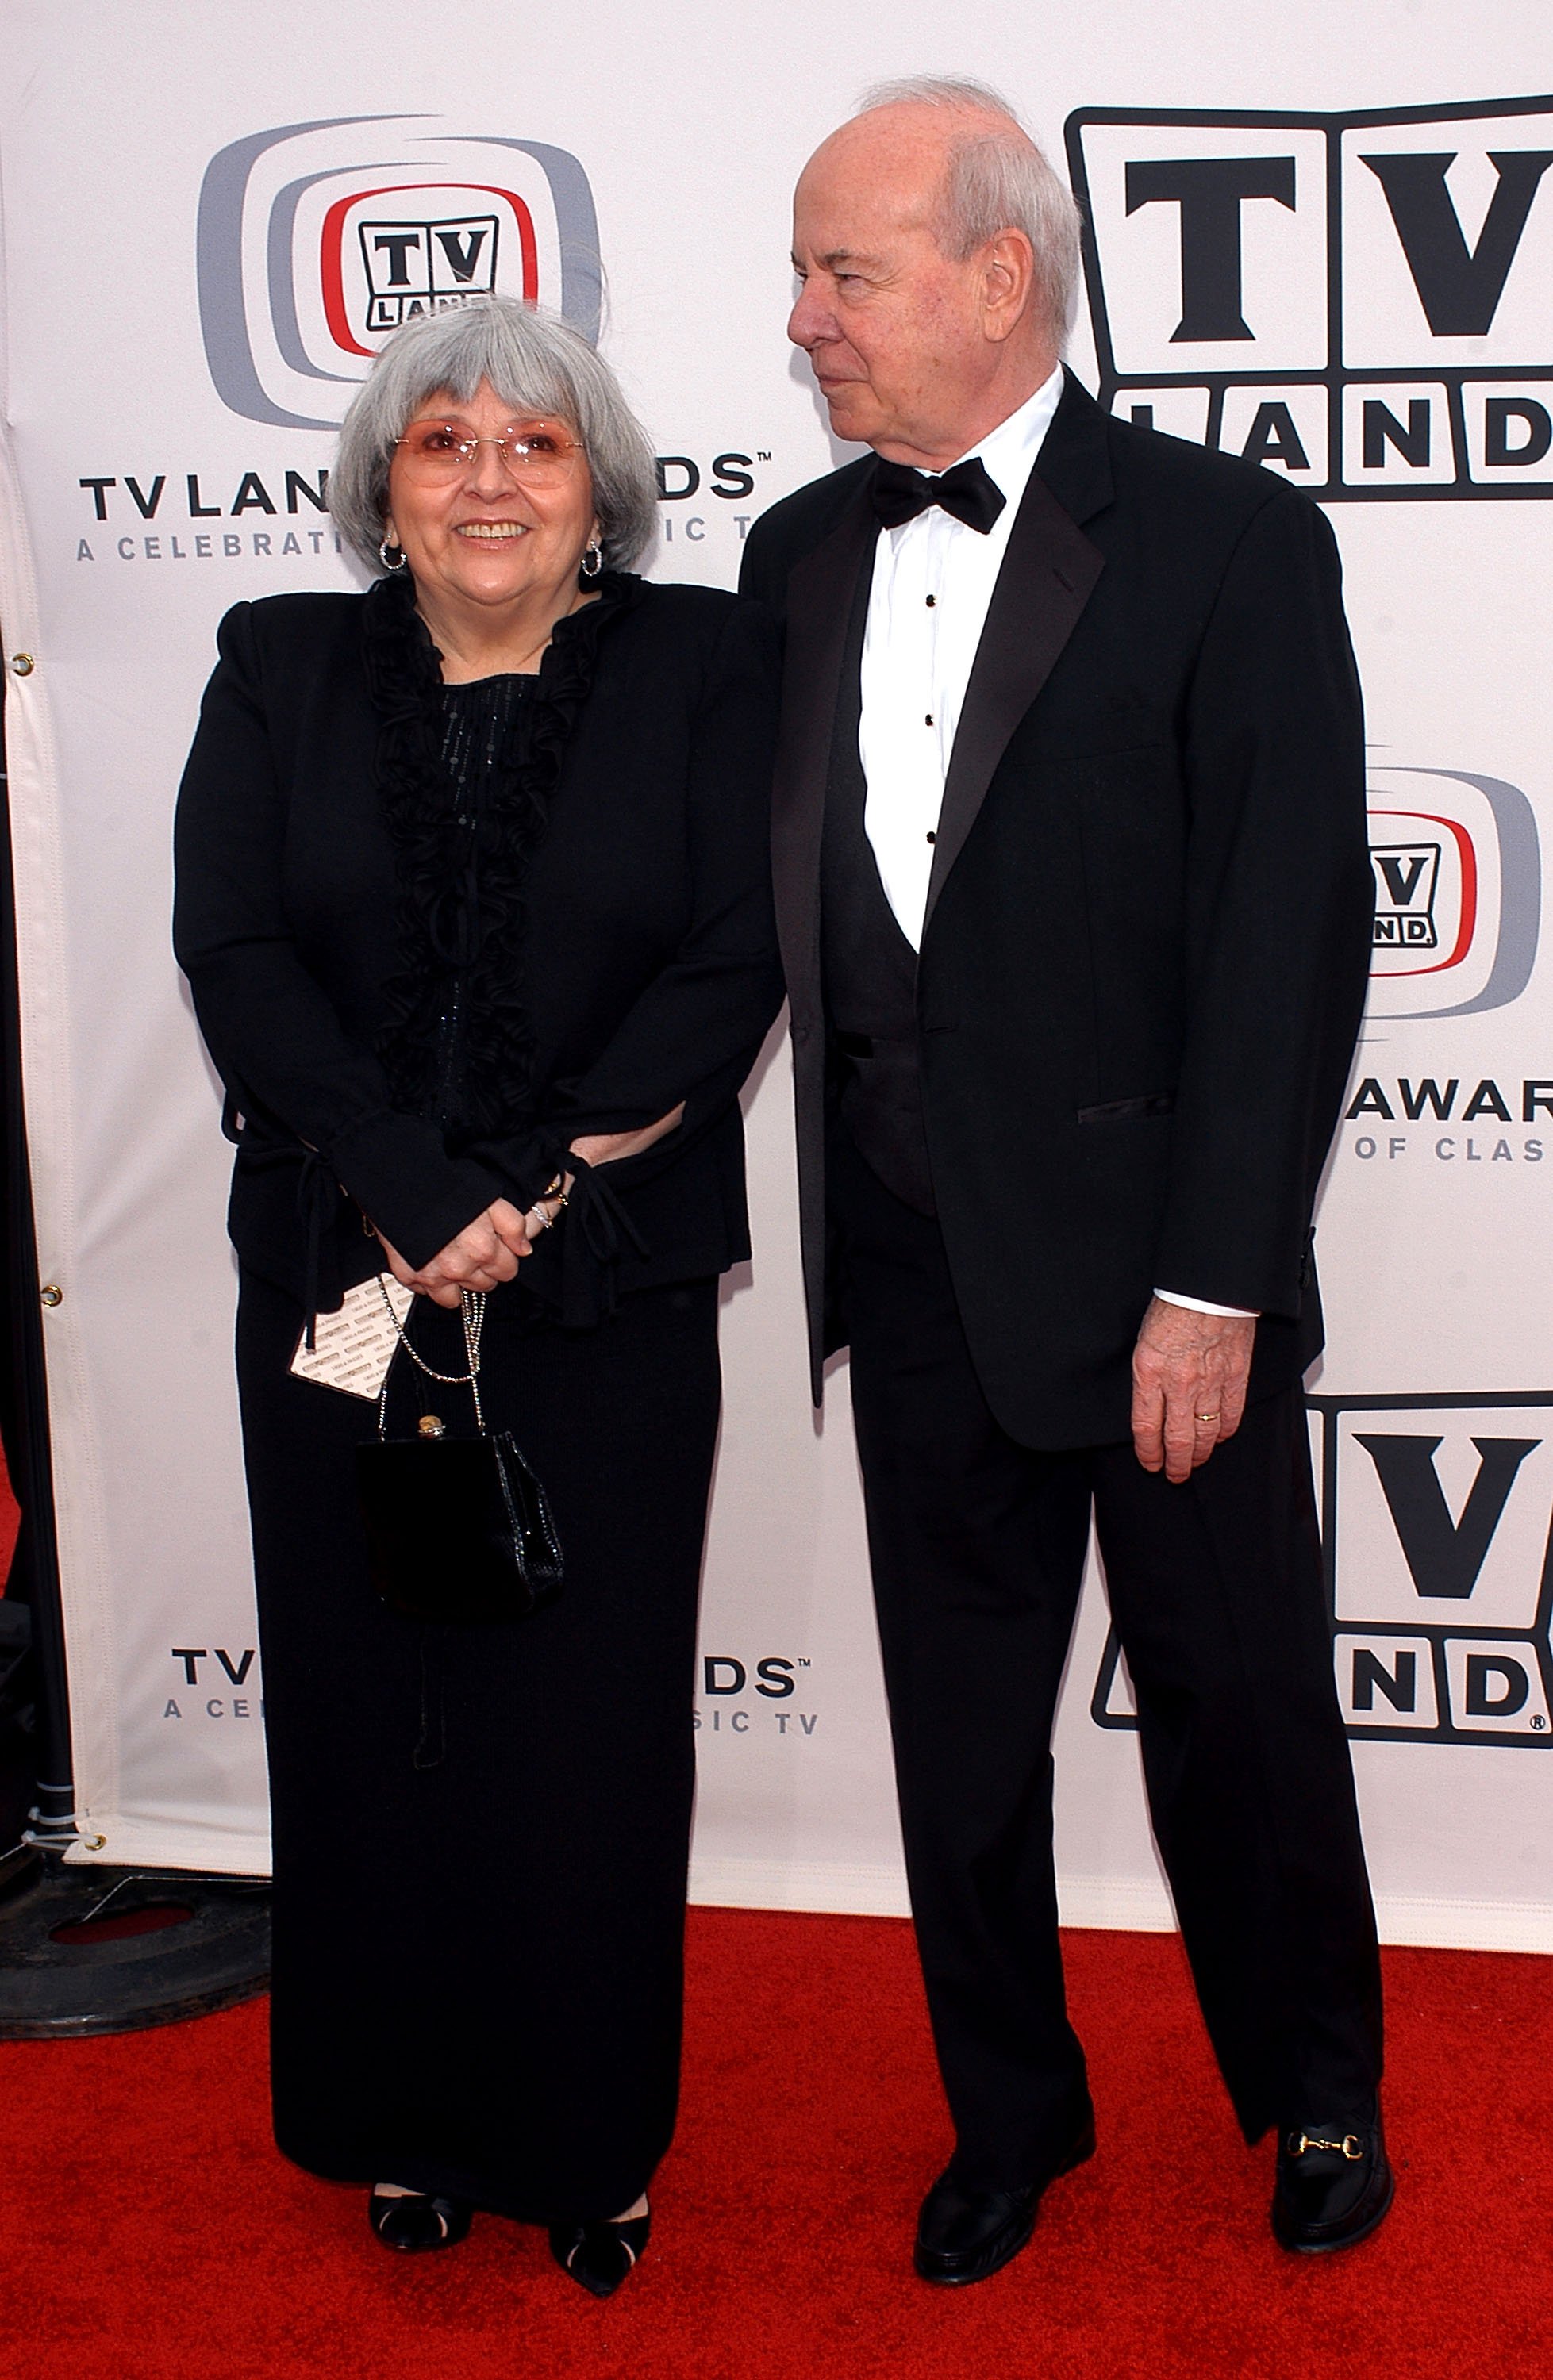 Tim Conway and his wife Charlene at the 2005 TV Land Awards, Santa Monica, California. | Photo: Getty Images